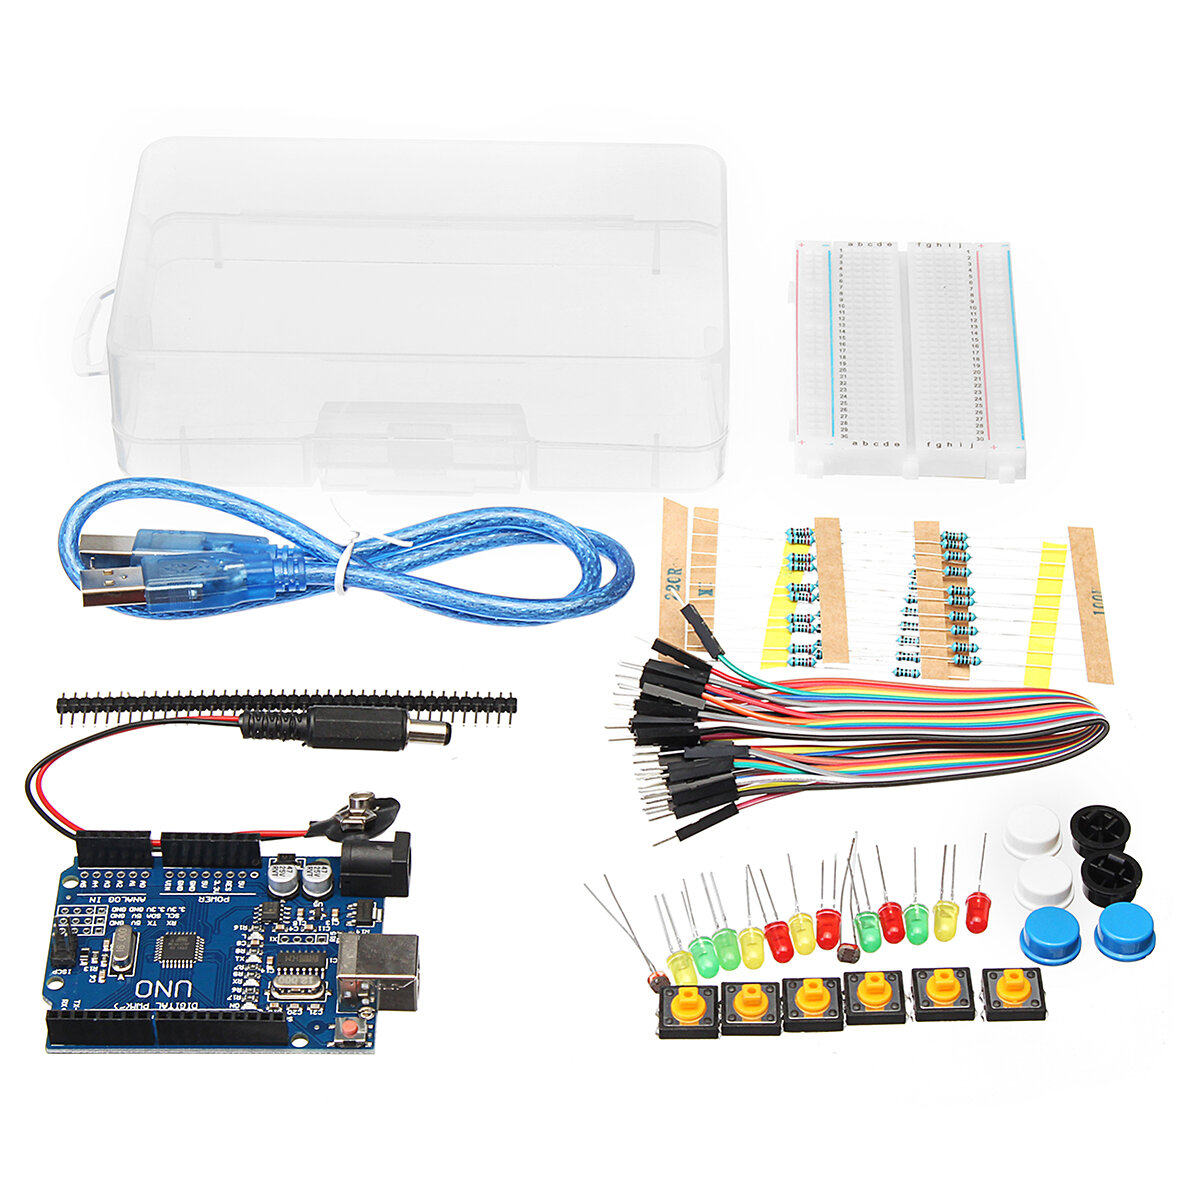 Basic Starter Kit UNO R3 Mini Breadboard LED Jumper Wire Button With Box For Geekcreit for Arduino - products that work